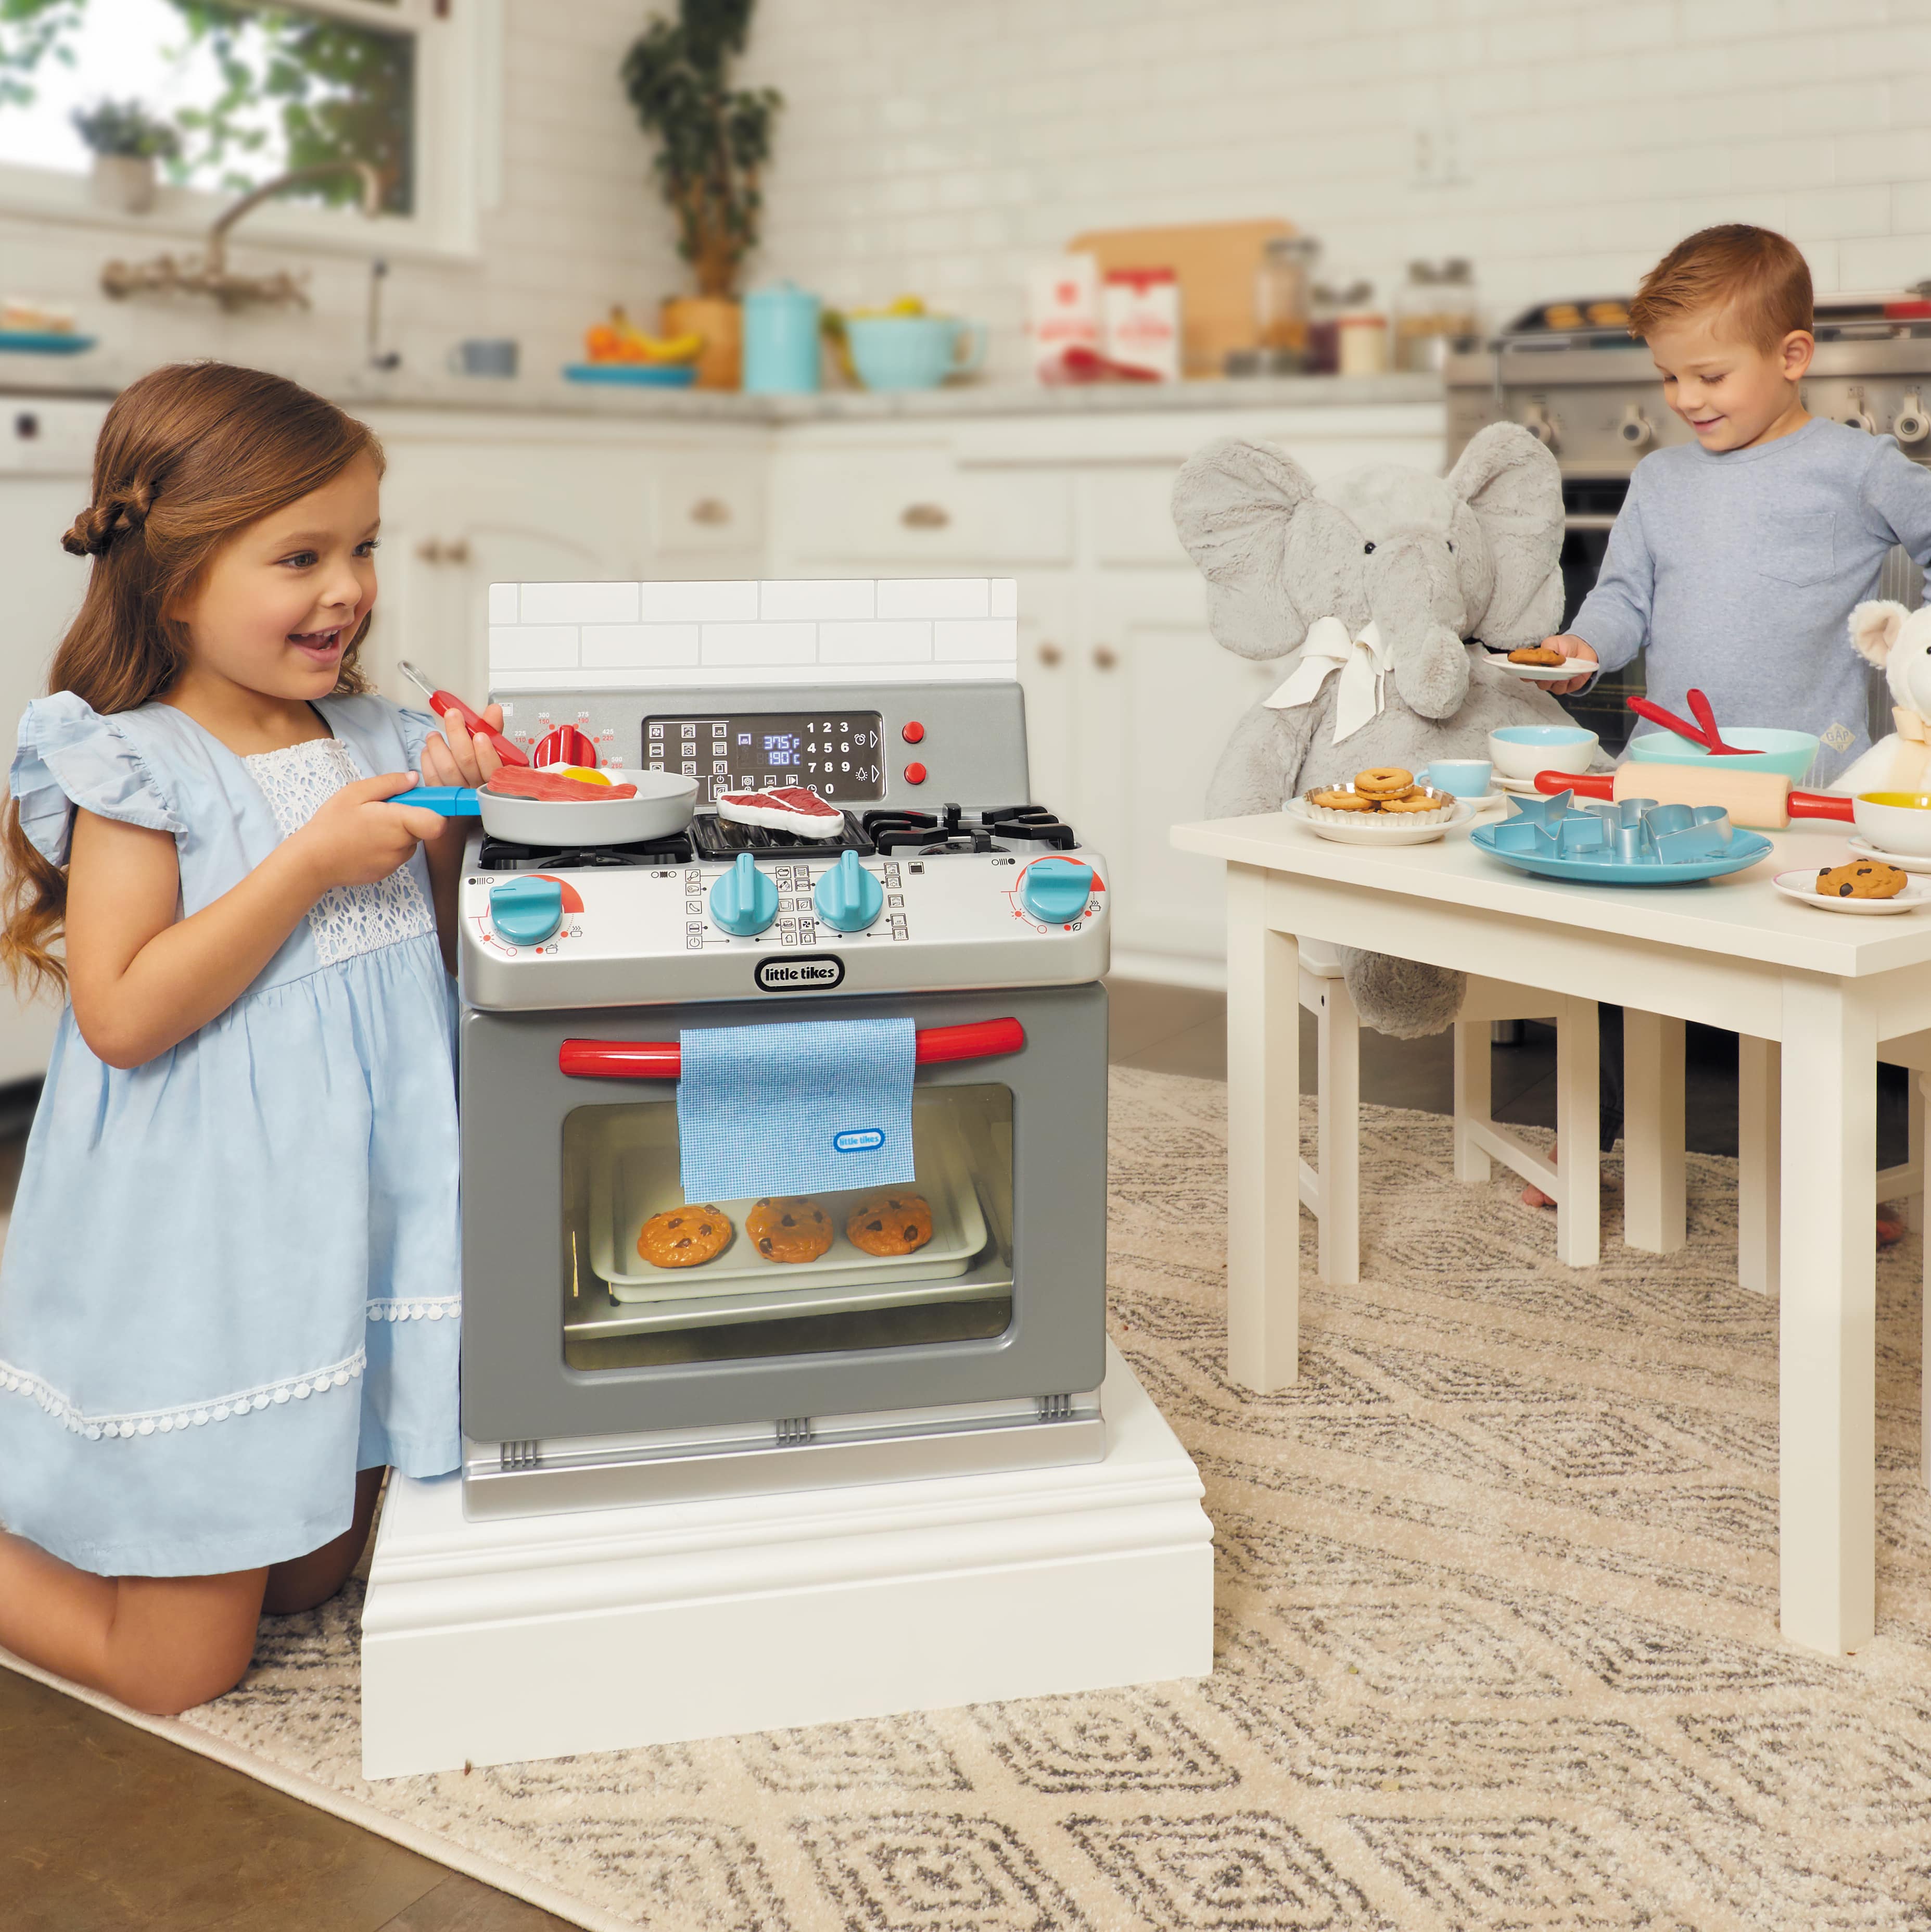 Little Tikes First Oven Realistic Pretend Play Appliance, Kids Play Kitchen w/ 11 Accessories & Realistic Cooking Sounds, Toy Gift, Ages 2+ - image 4 of 7